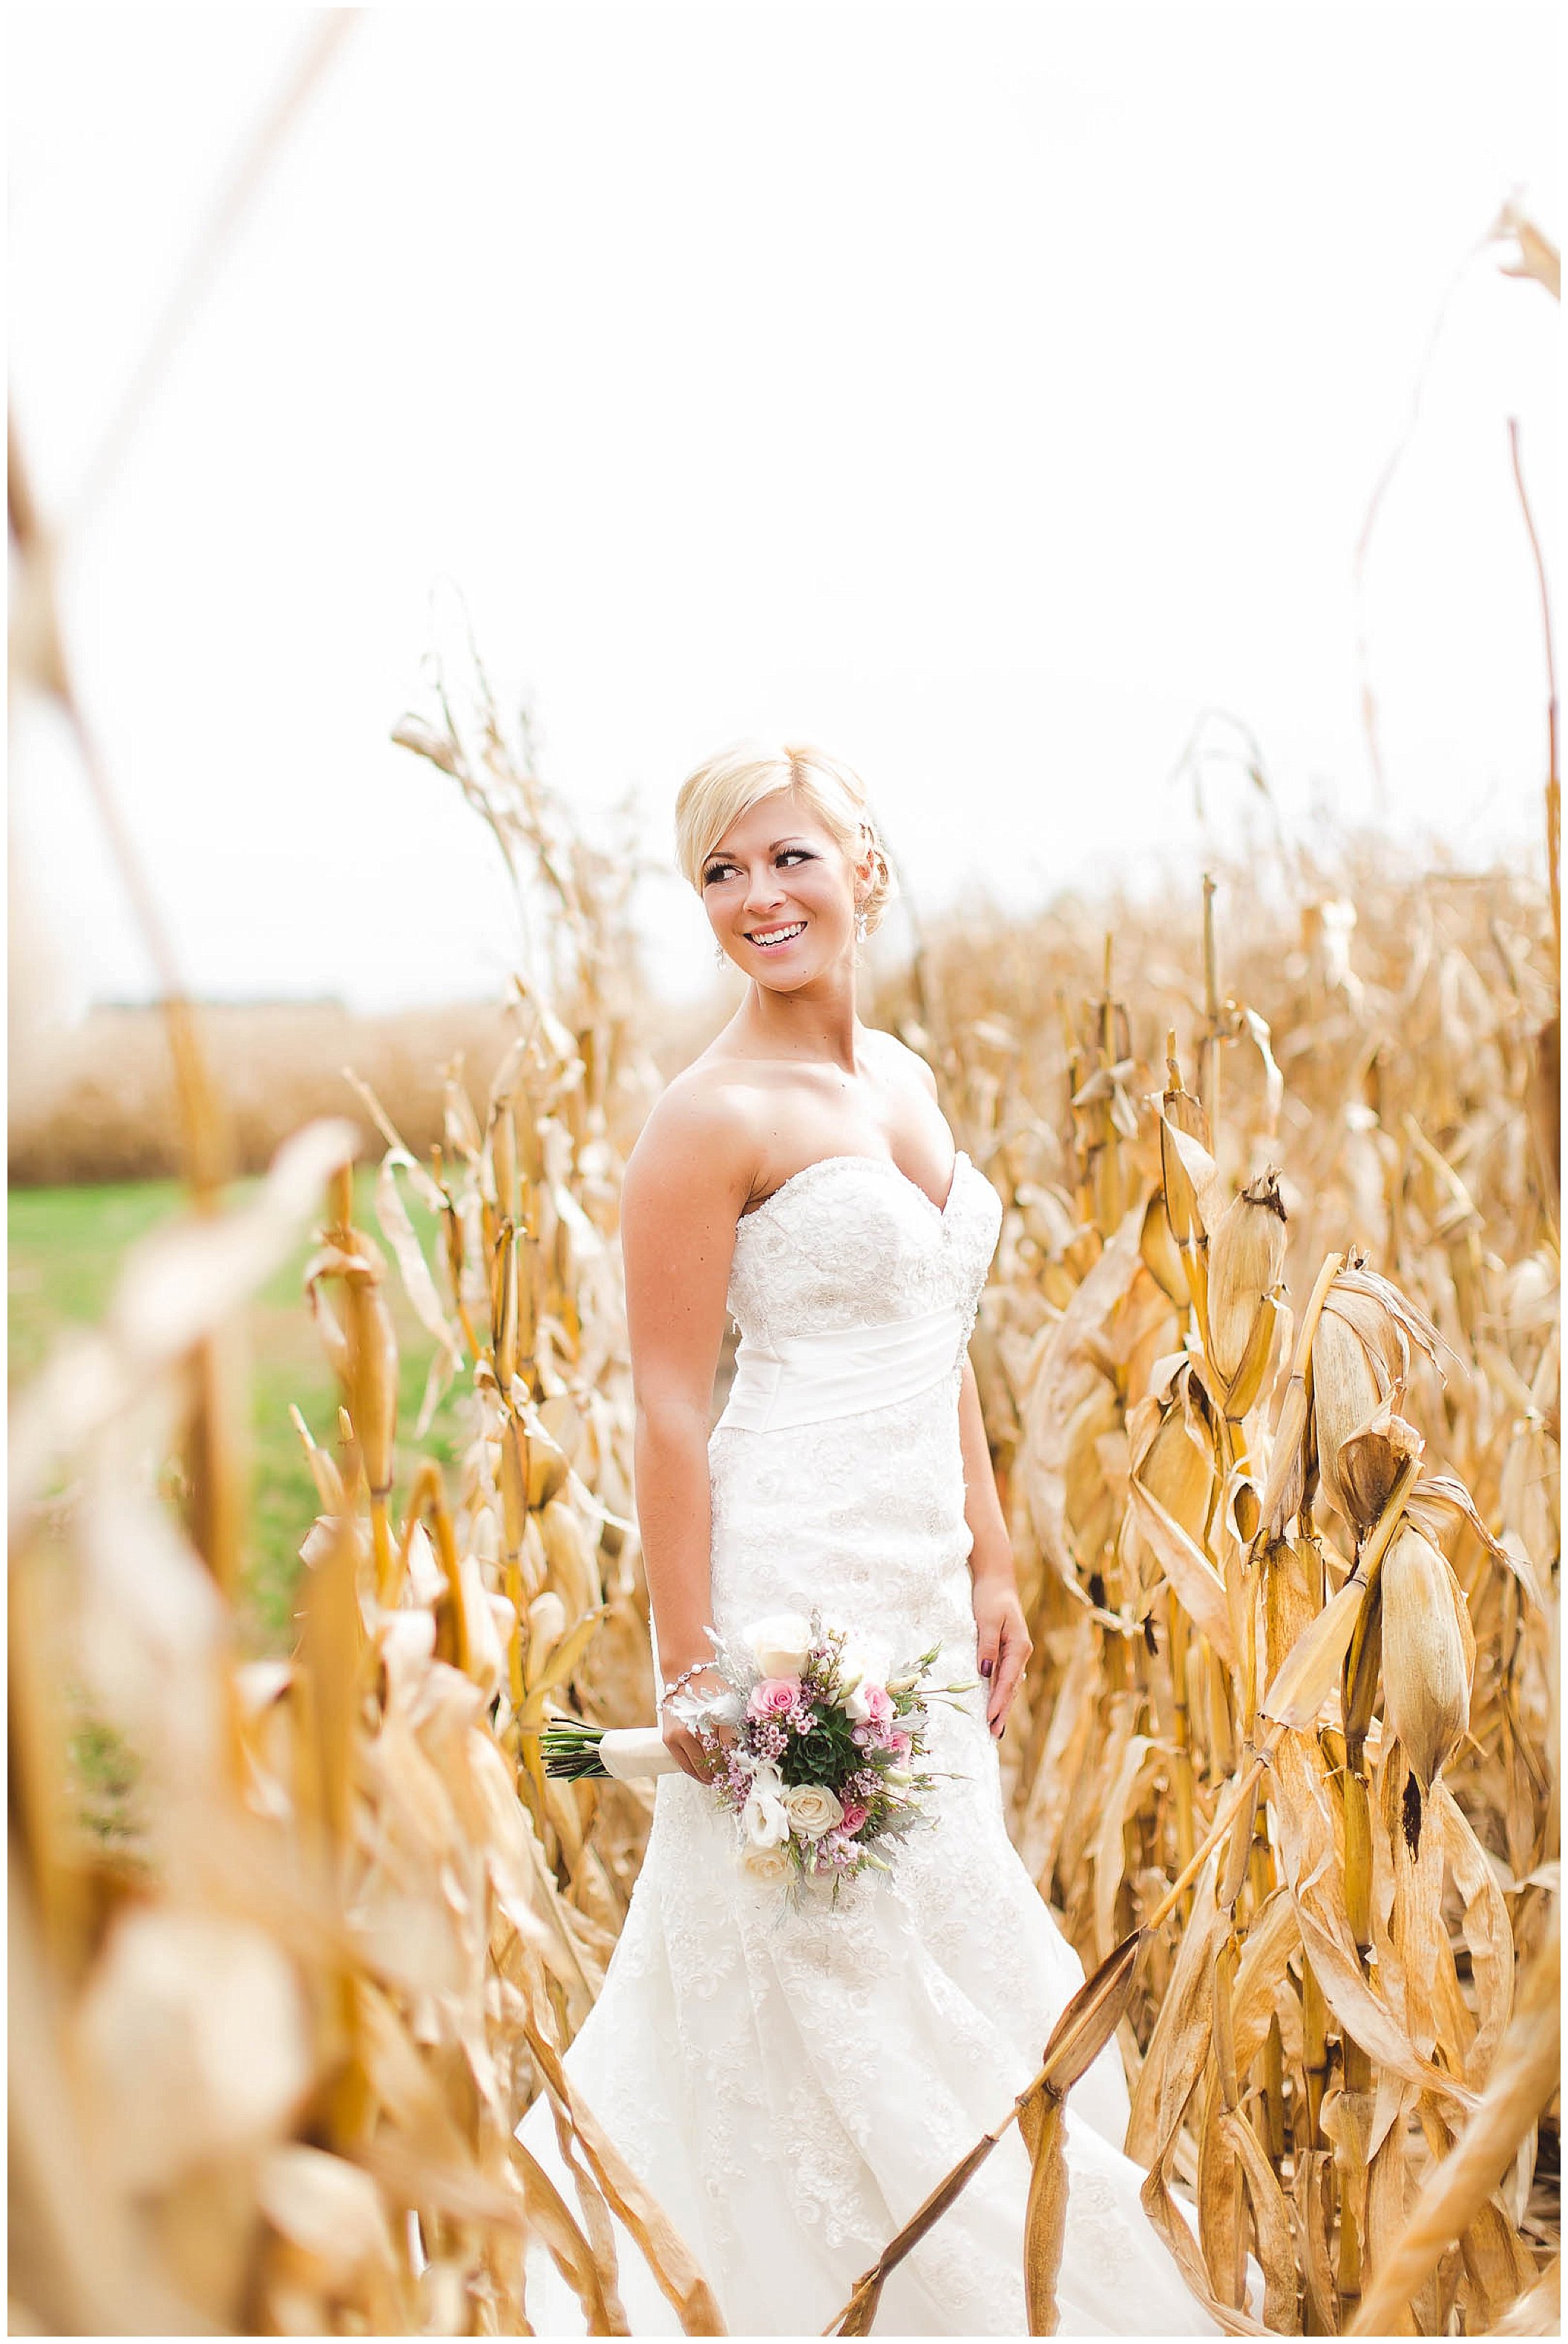 Rustic Wedding at Back Forty sporting clays in Indiana_0105.jpg